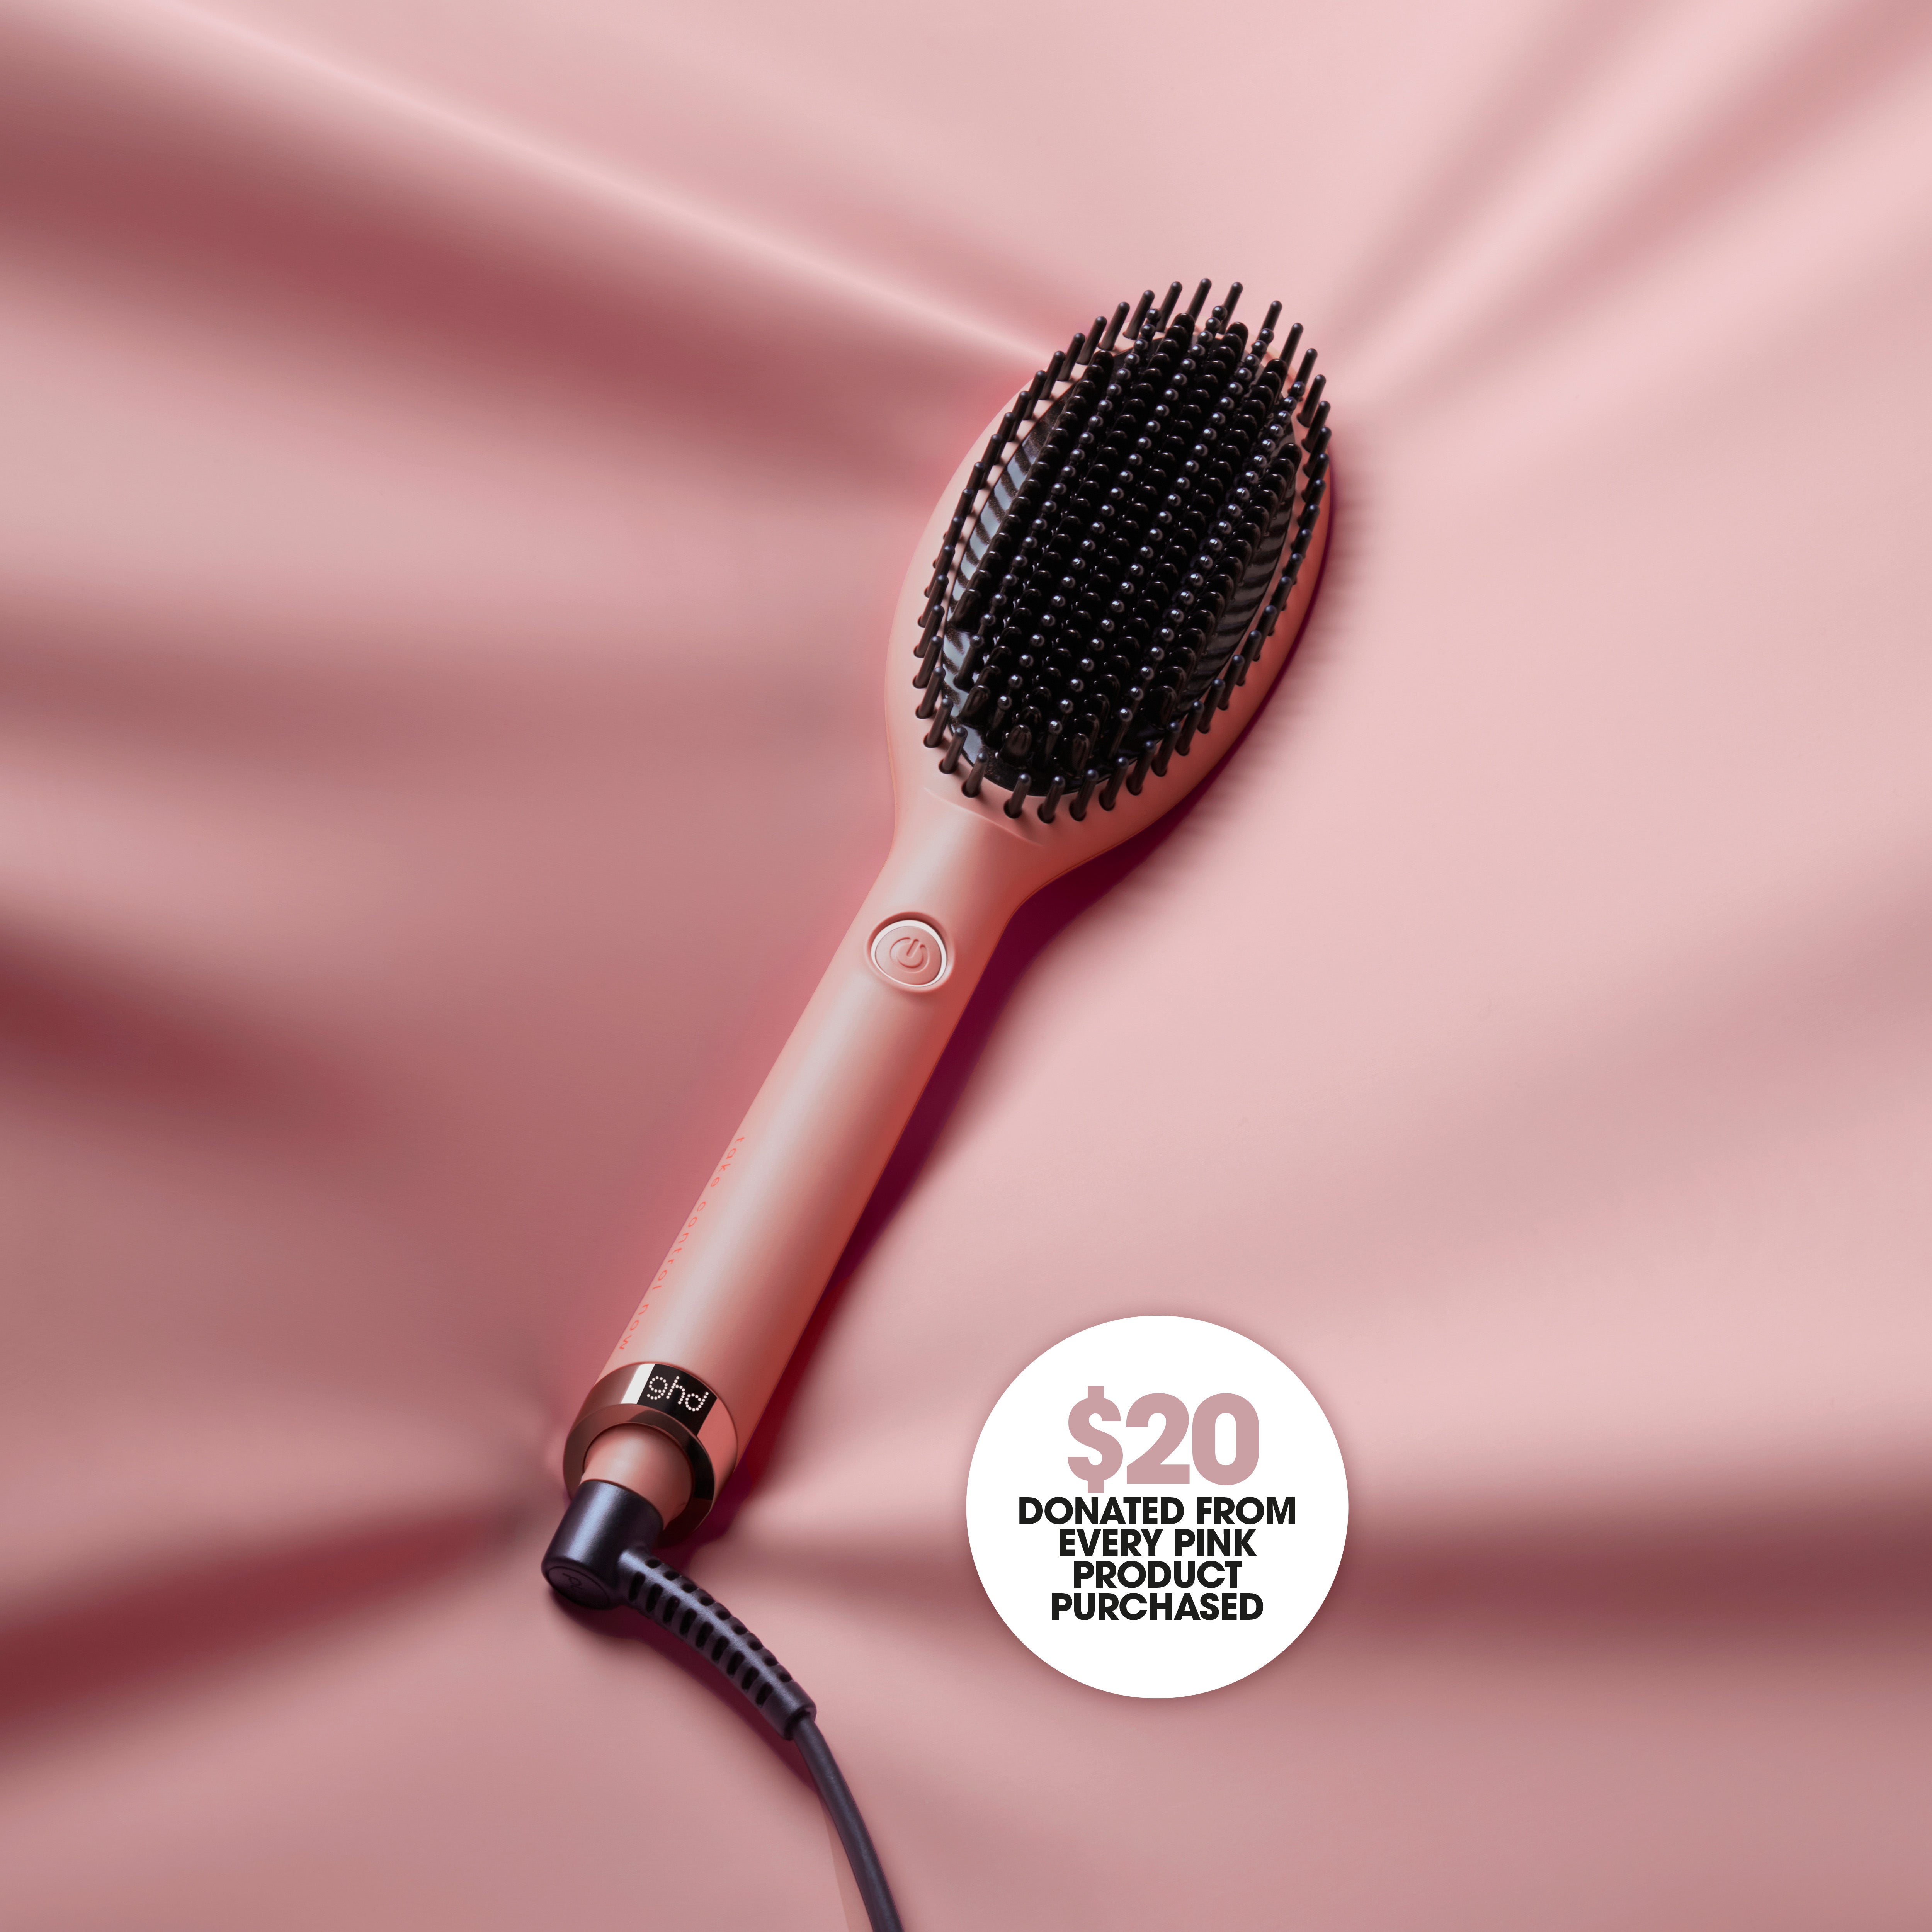 Picture of Glide Hair Straightener Brush Limited Edition In Pink Peach